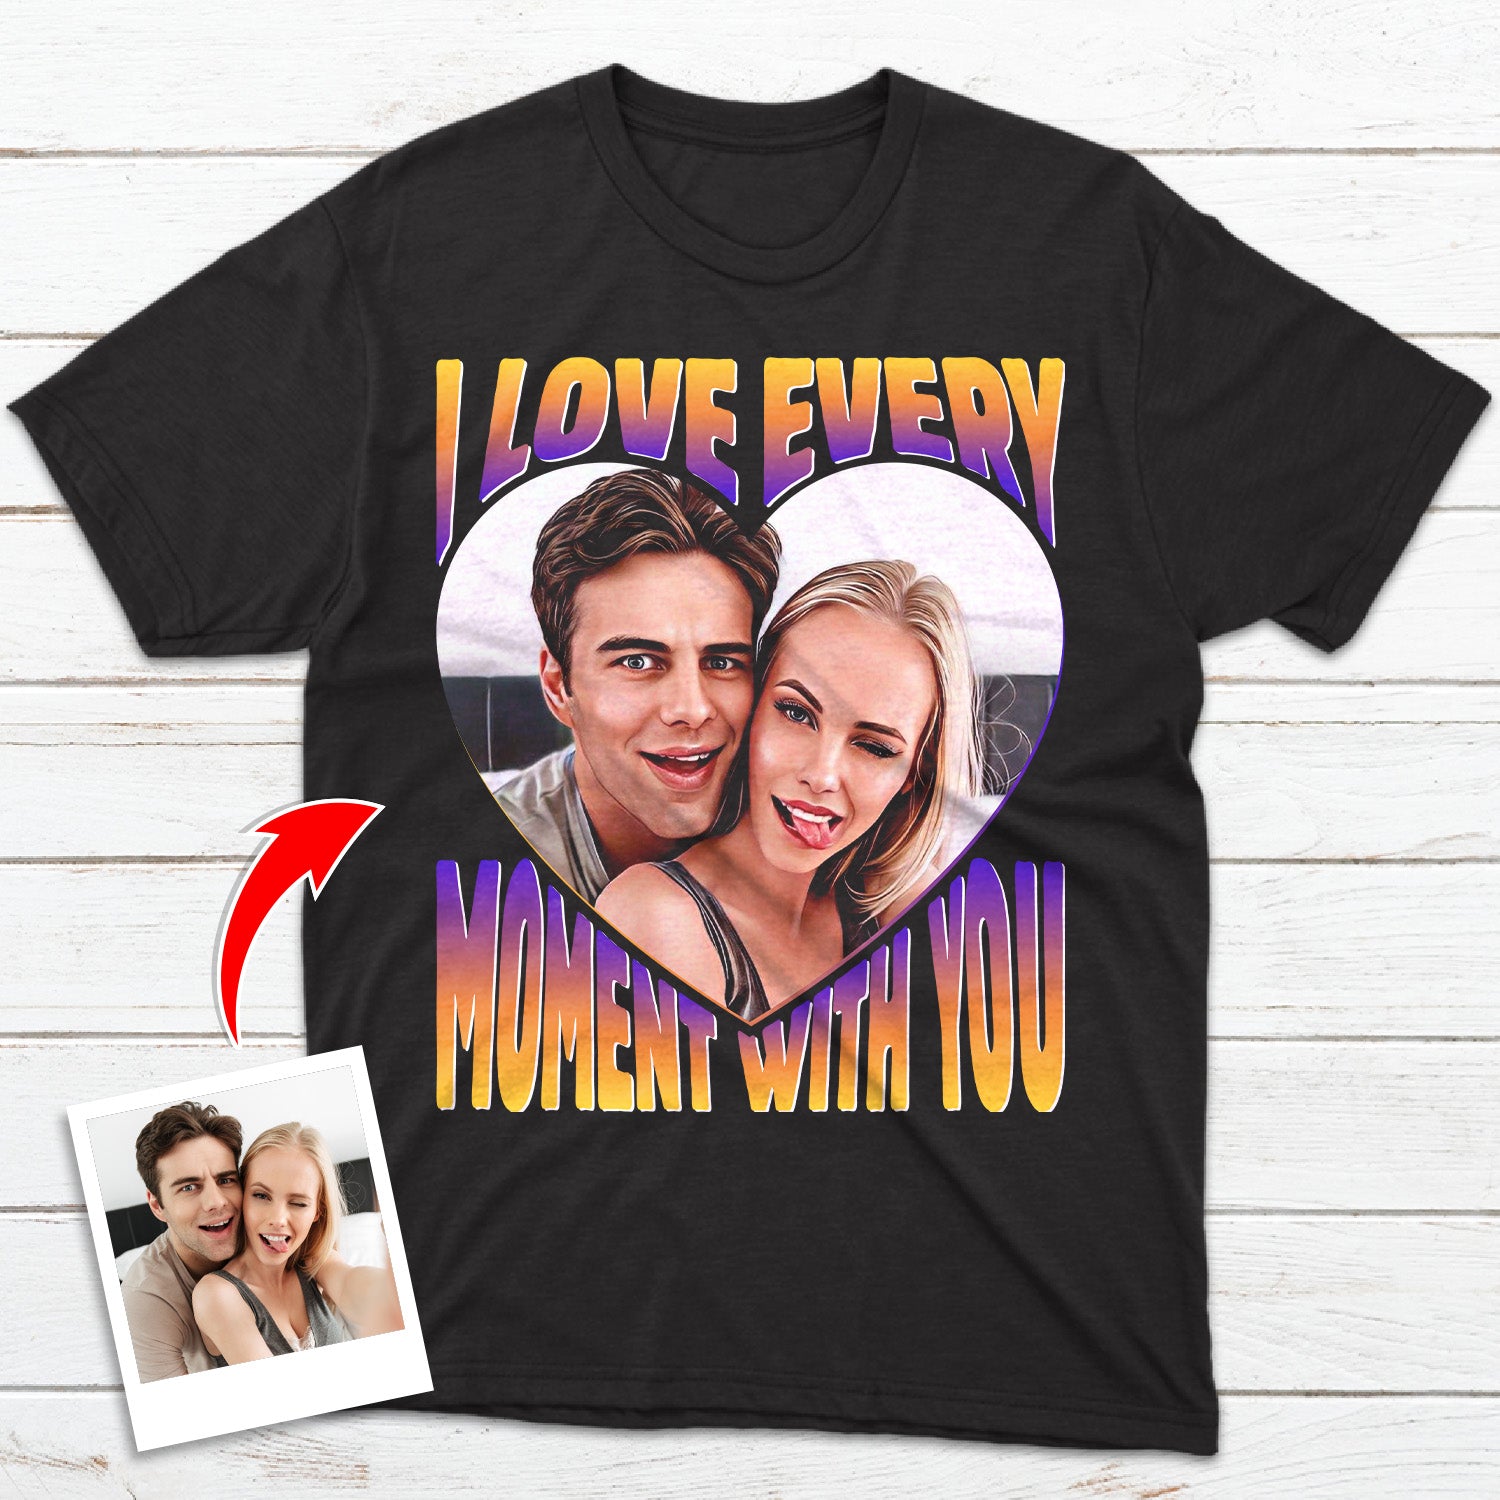 I Love Every Moment With You T-Shirt - Personalized Gifts For Couple